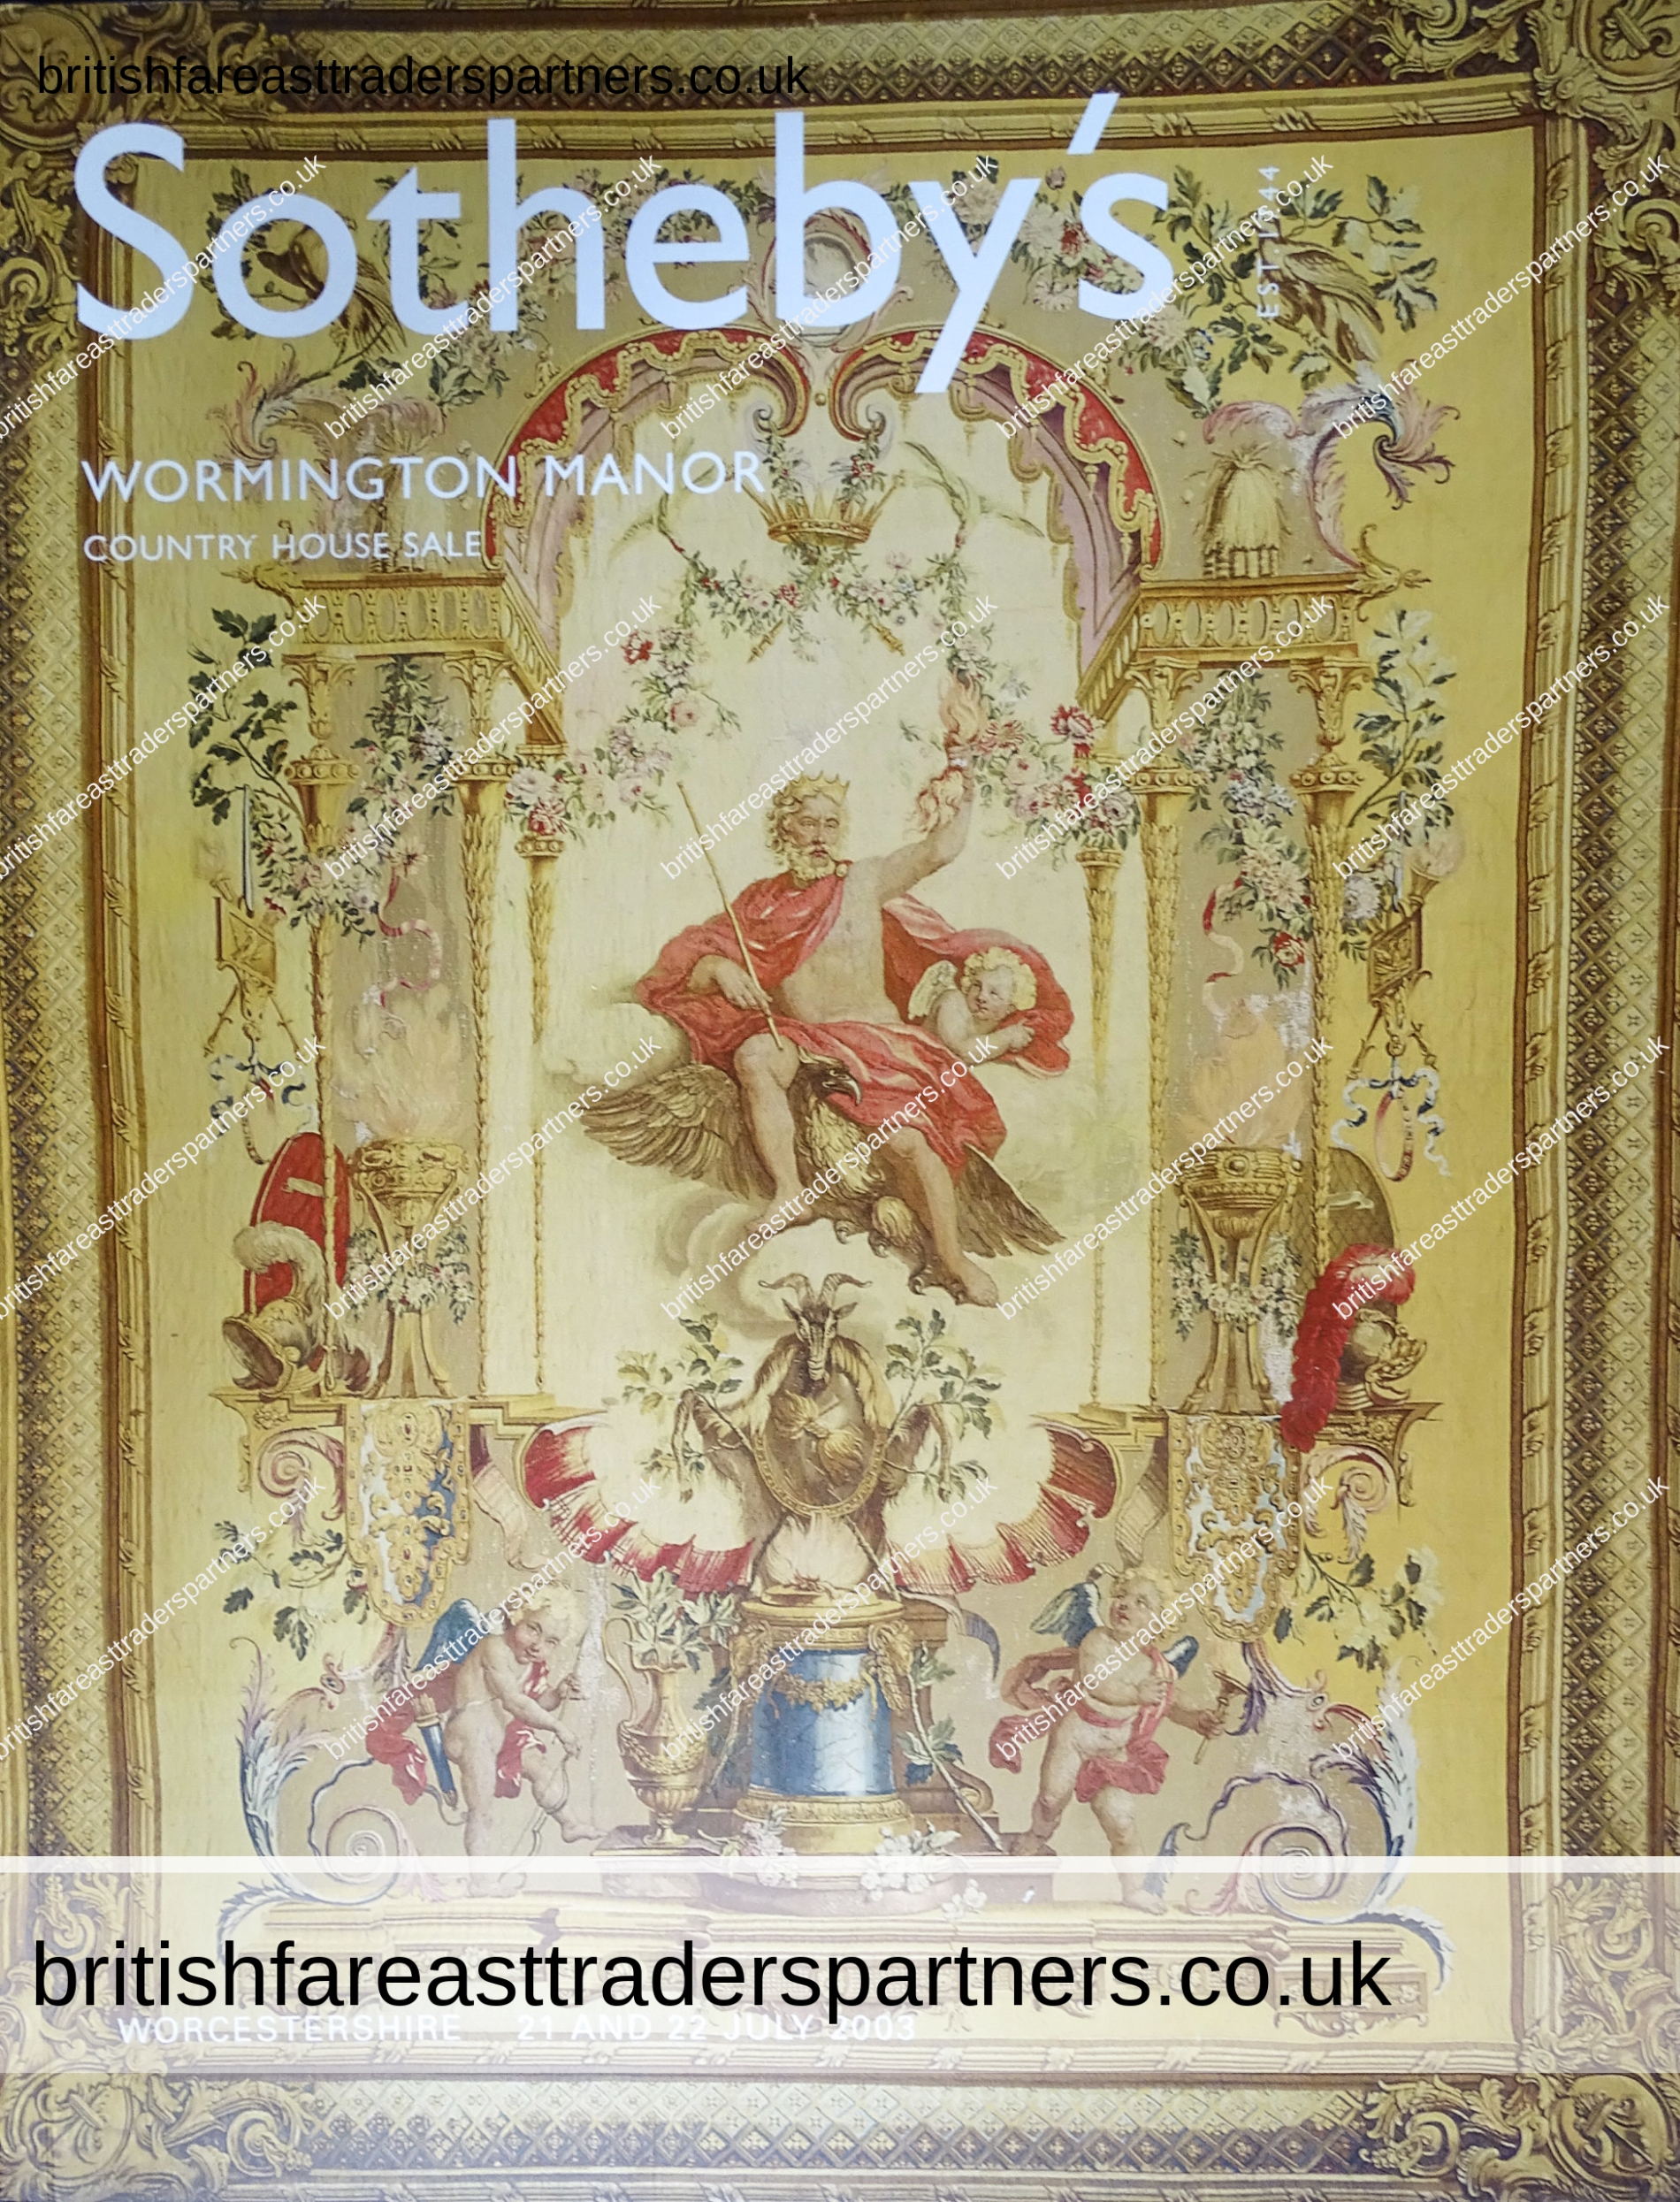 Sotheby’s Wormington Manor Country House Sale C. Rowley Esq. AUCTION Catalogue